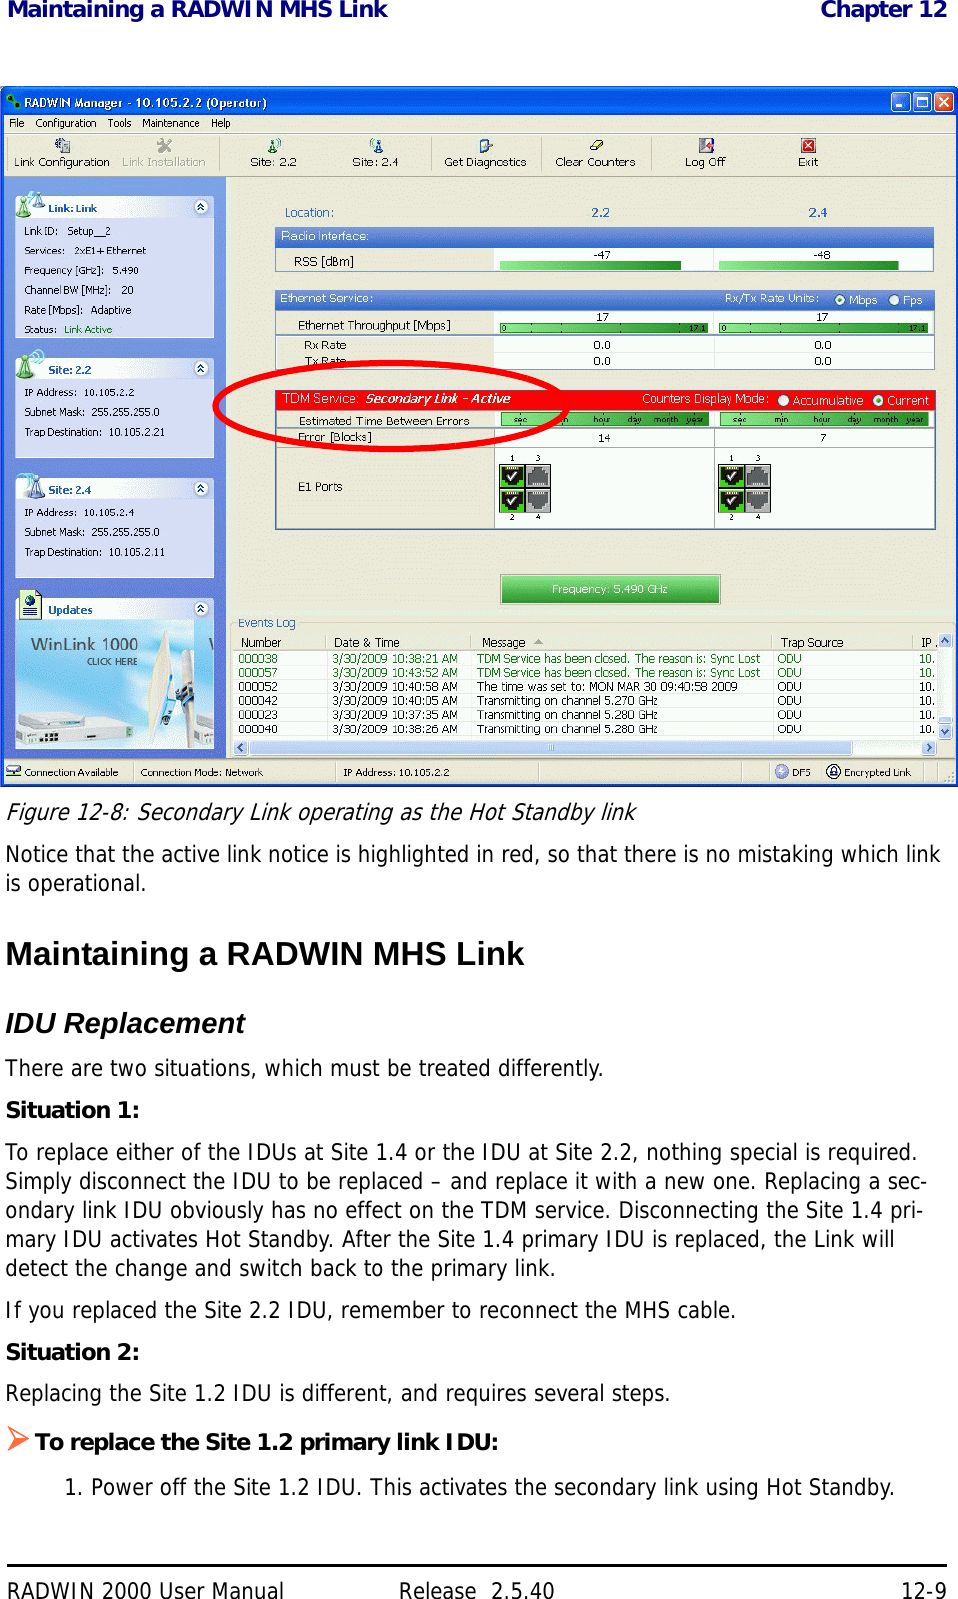 Maintaining a RADWIN MHS Link Chapter 12RADWIN 2000 User Manual Release  2.5.40 12-9Figure 12-8: Secondary Link operating as the Hot Standby linkNotice that the active link notice is highlighted in red, so that there is no mistaking which link is operational.Maintaining a RADWIN MHS LinkIDU ReplacementThere are two situations, which must be treated differently.Situation 1:To replace either of the IDUs at Site 1.4 or the IDU at Site 2.2, nothing special is required. Simply disconnect the IDU to be replaced – and replace it with a new one. Replacing a sec-ondary link IDU obviously has no effect on the TDM service. Disconnecting the Site 1.4 pri-mary IDU activates Hot Standby. After the Site 1.4 primary IDU is replaced, the Link will detect the change and switch back to the primary link.If you replaced the Site 2.2 IDU, remember to reconnect the MHS cable.Situation 2:Replacing the Site 1.2 IDU is different, and requires several steps.To replace the Site 1.2 primary link IDU:1. Power off the Site 1.2 IDU. This activates the secondary link using Hot Standby.